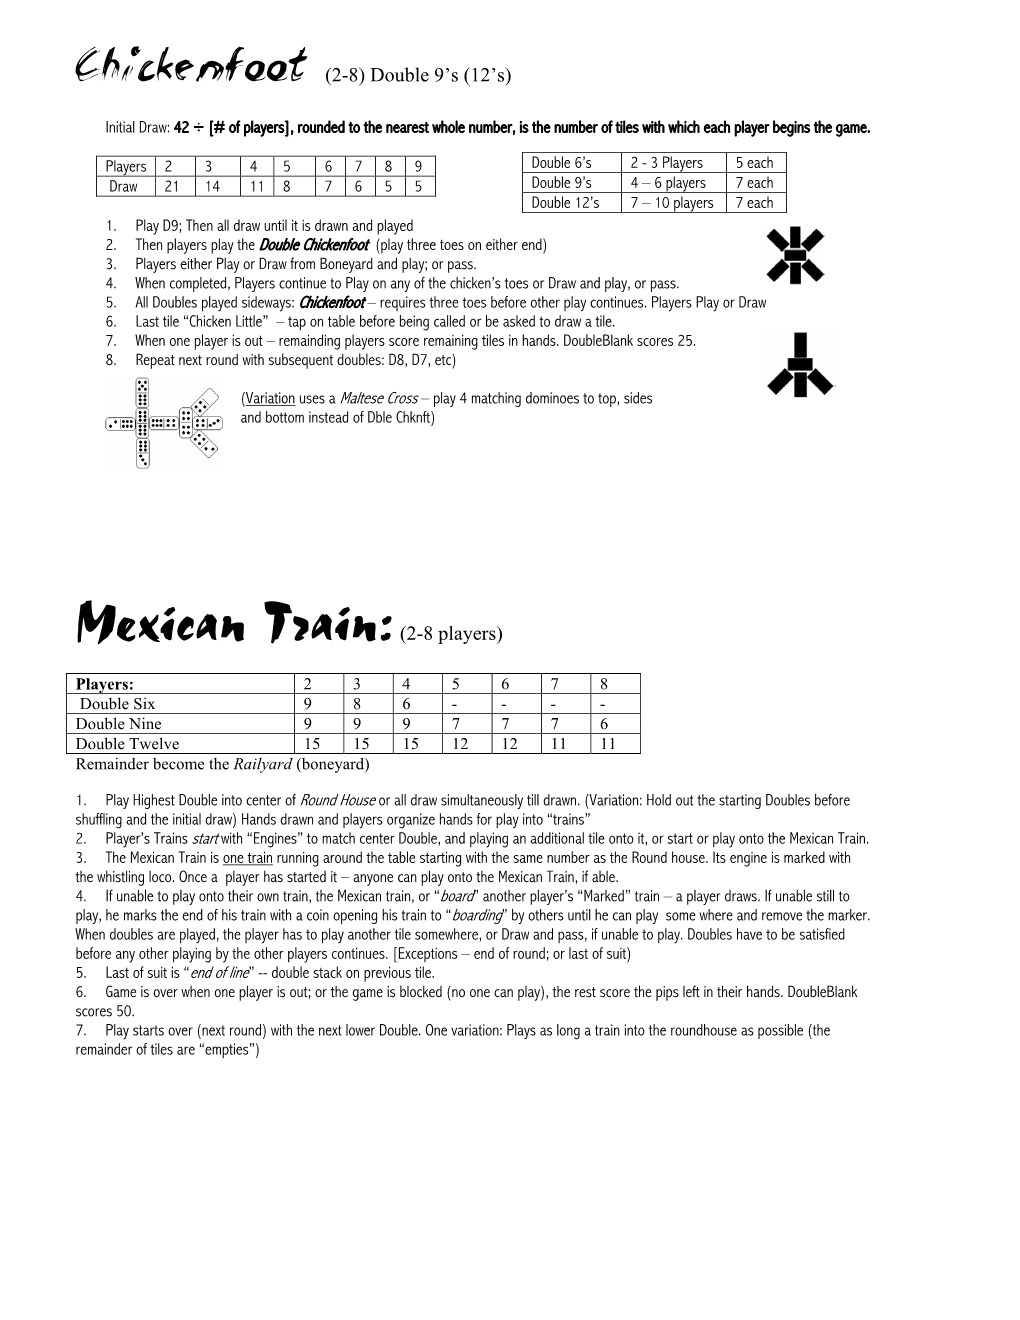 Mexican Train:(2-8 Players)